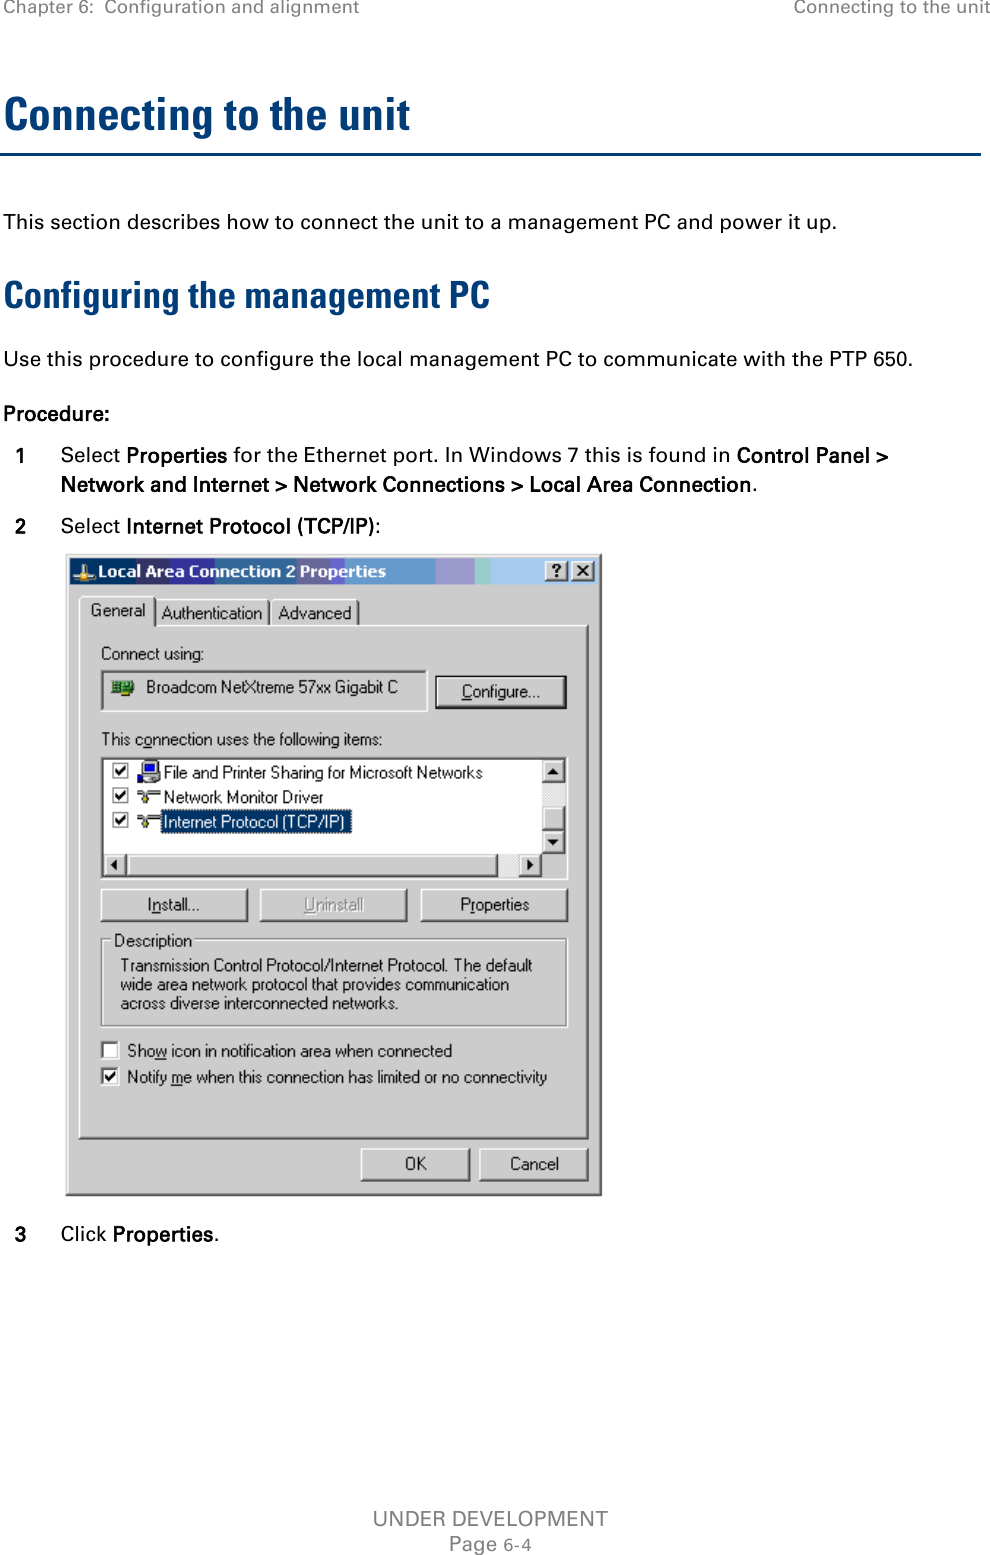 Chapter 6:  Configuration and alignment Connecting to the unit  Connecting to the unit This section describes how to connect the unit to a management PC and power it up.  Configuring the management PC Use this procedure to configure the local management PC to communicate with the PTP 650. Procedure: 1 Select Properties for the Ethernet port. In Windows 7 this is found in Control Panel &gt; Network and Internet &gt; Network Connections &gt; Local Area Connection. 2 Select Internet Protocol (TCP/IP):  3 Click Properties. UNDER DEVELOPMENT Page 6-4 